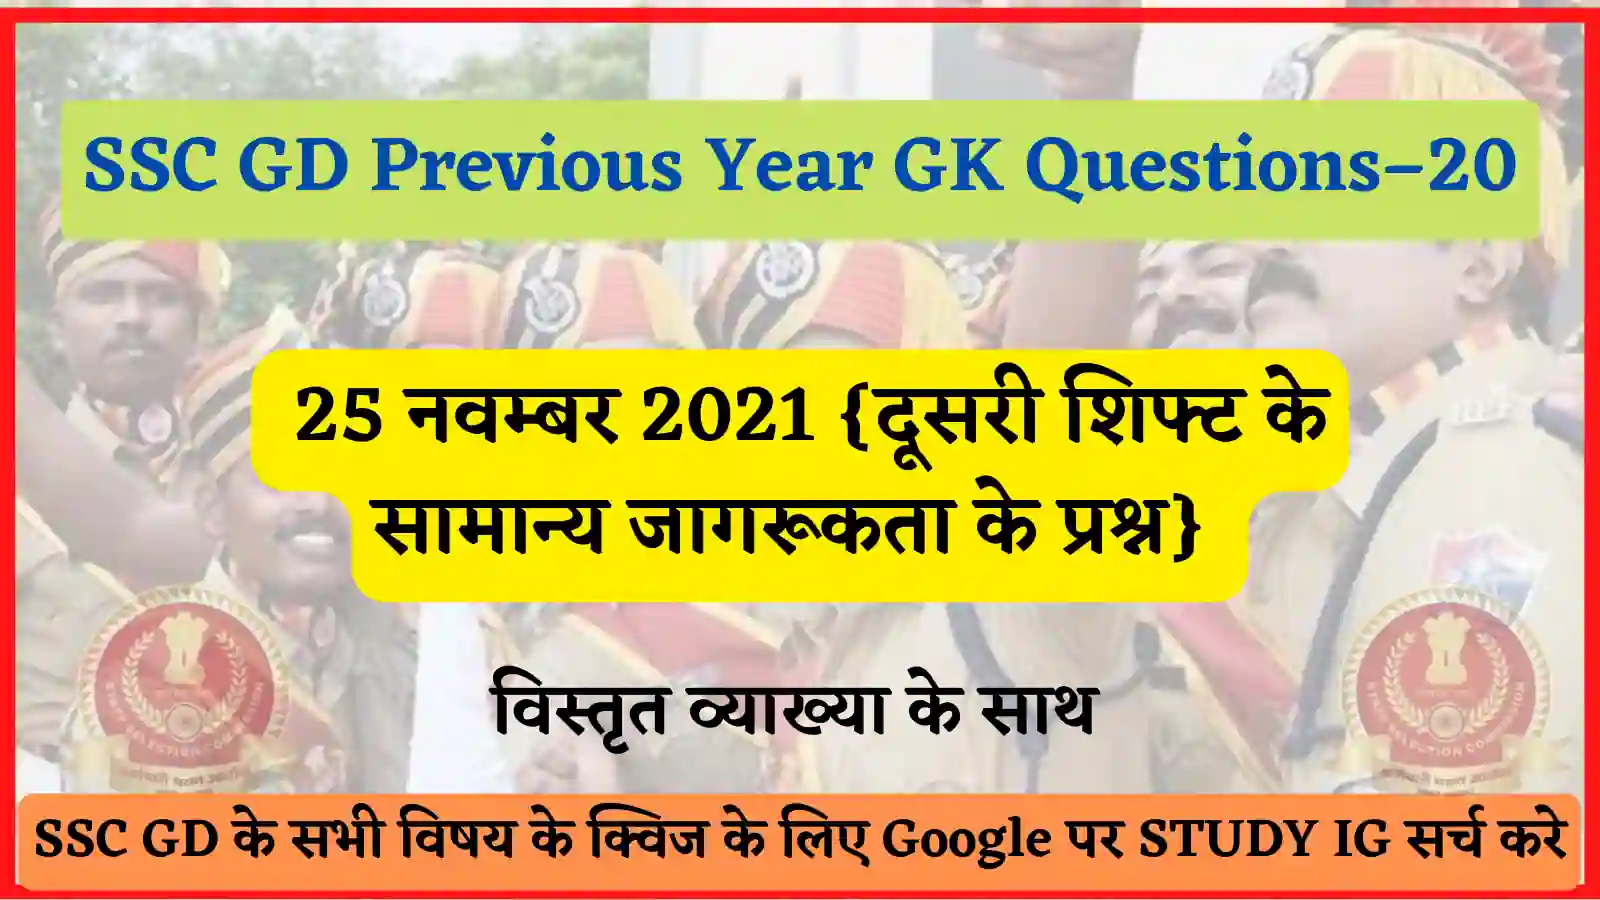 SSC GD Previous Year GK Questions / Quiz - 20